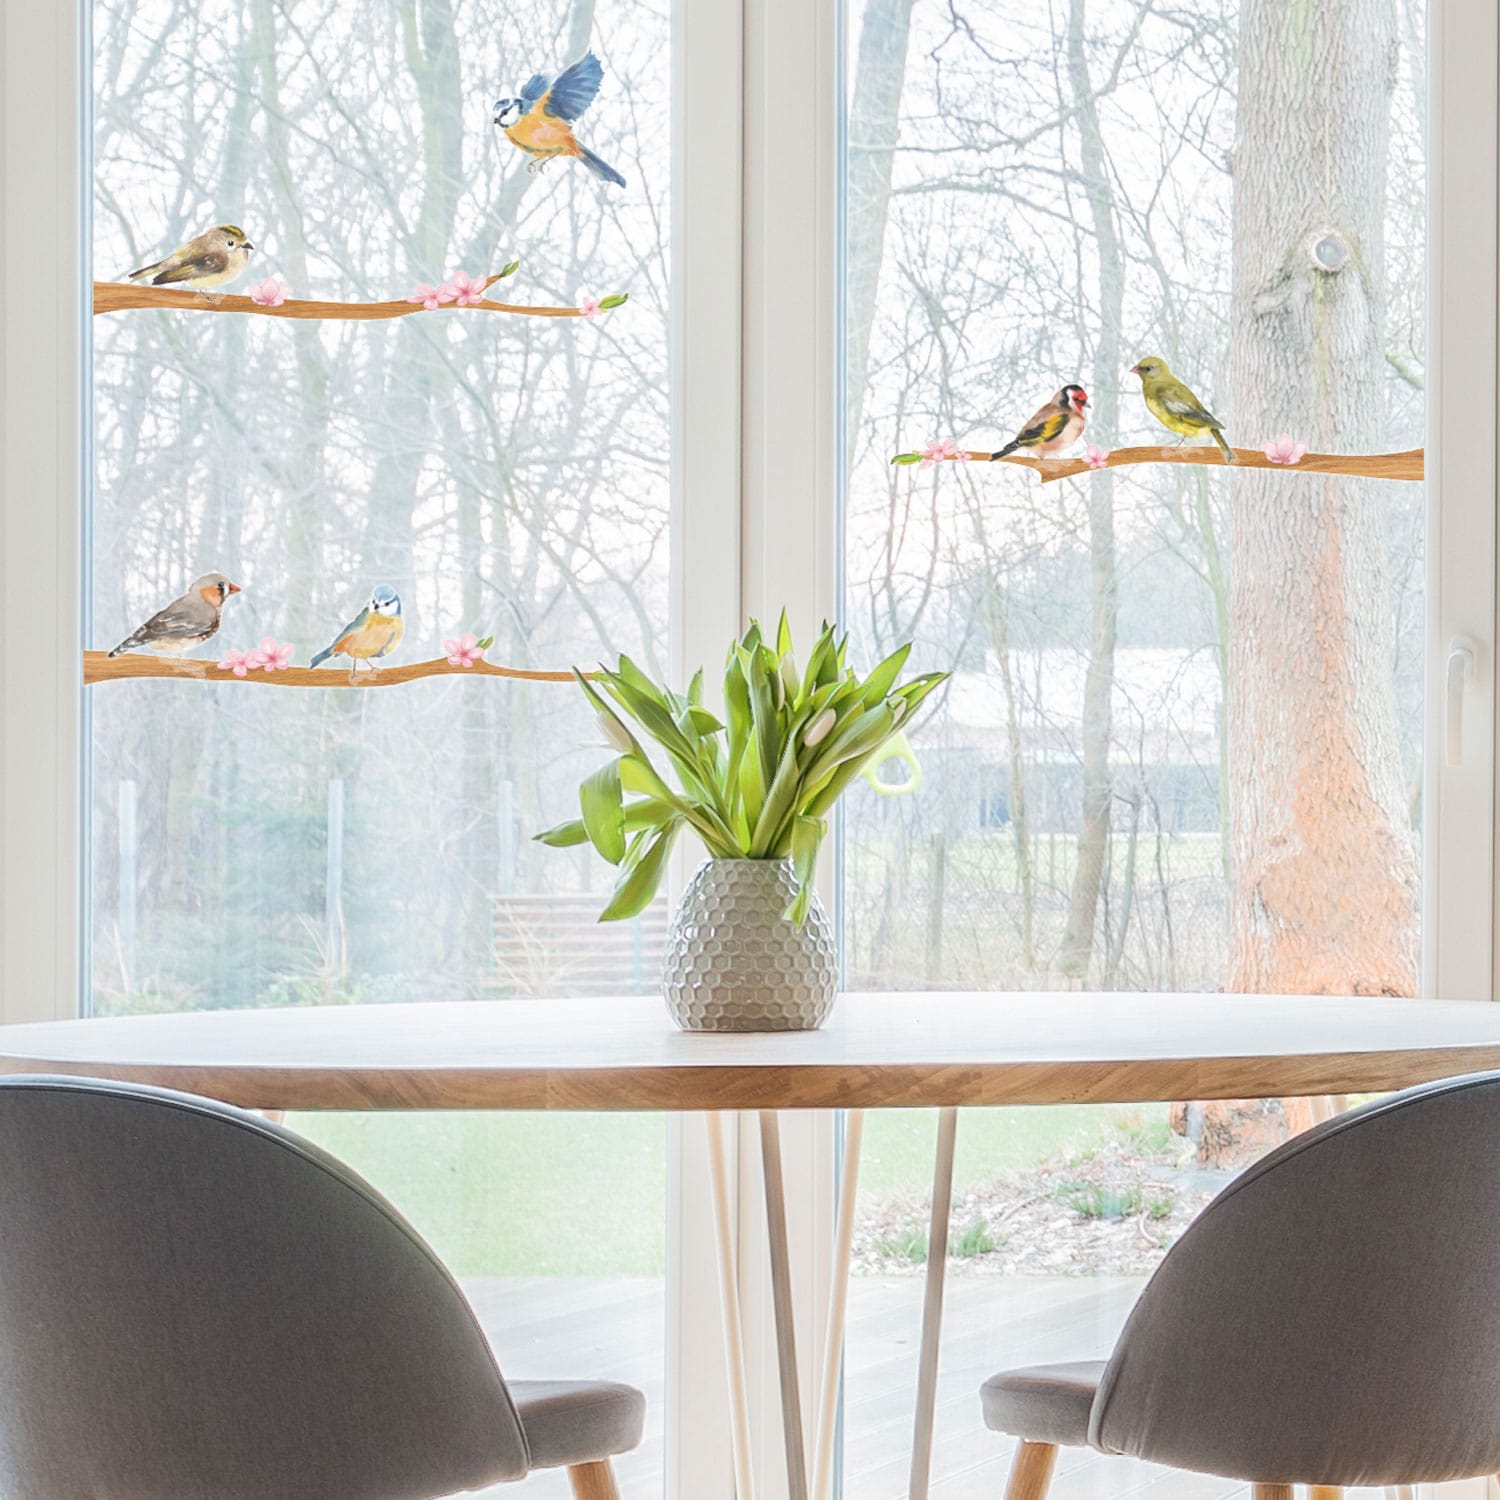 Spring bird window stickers perfect for decorating your windows